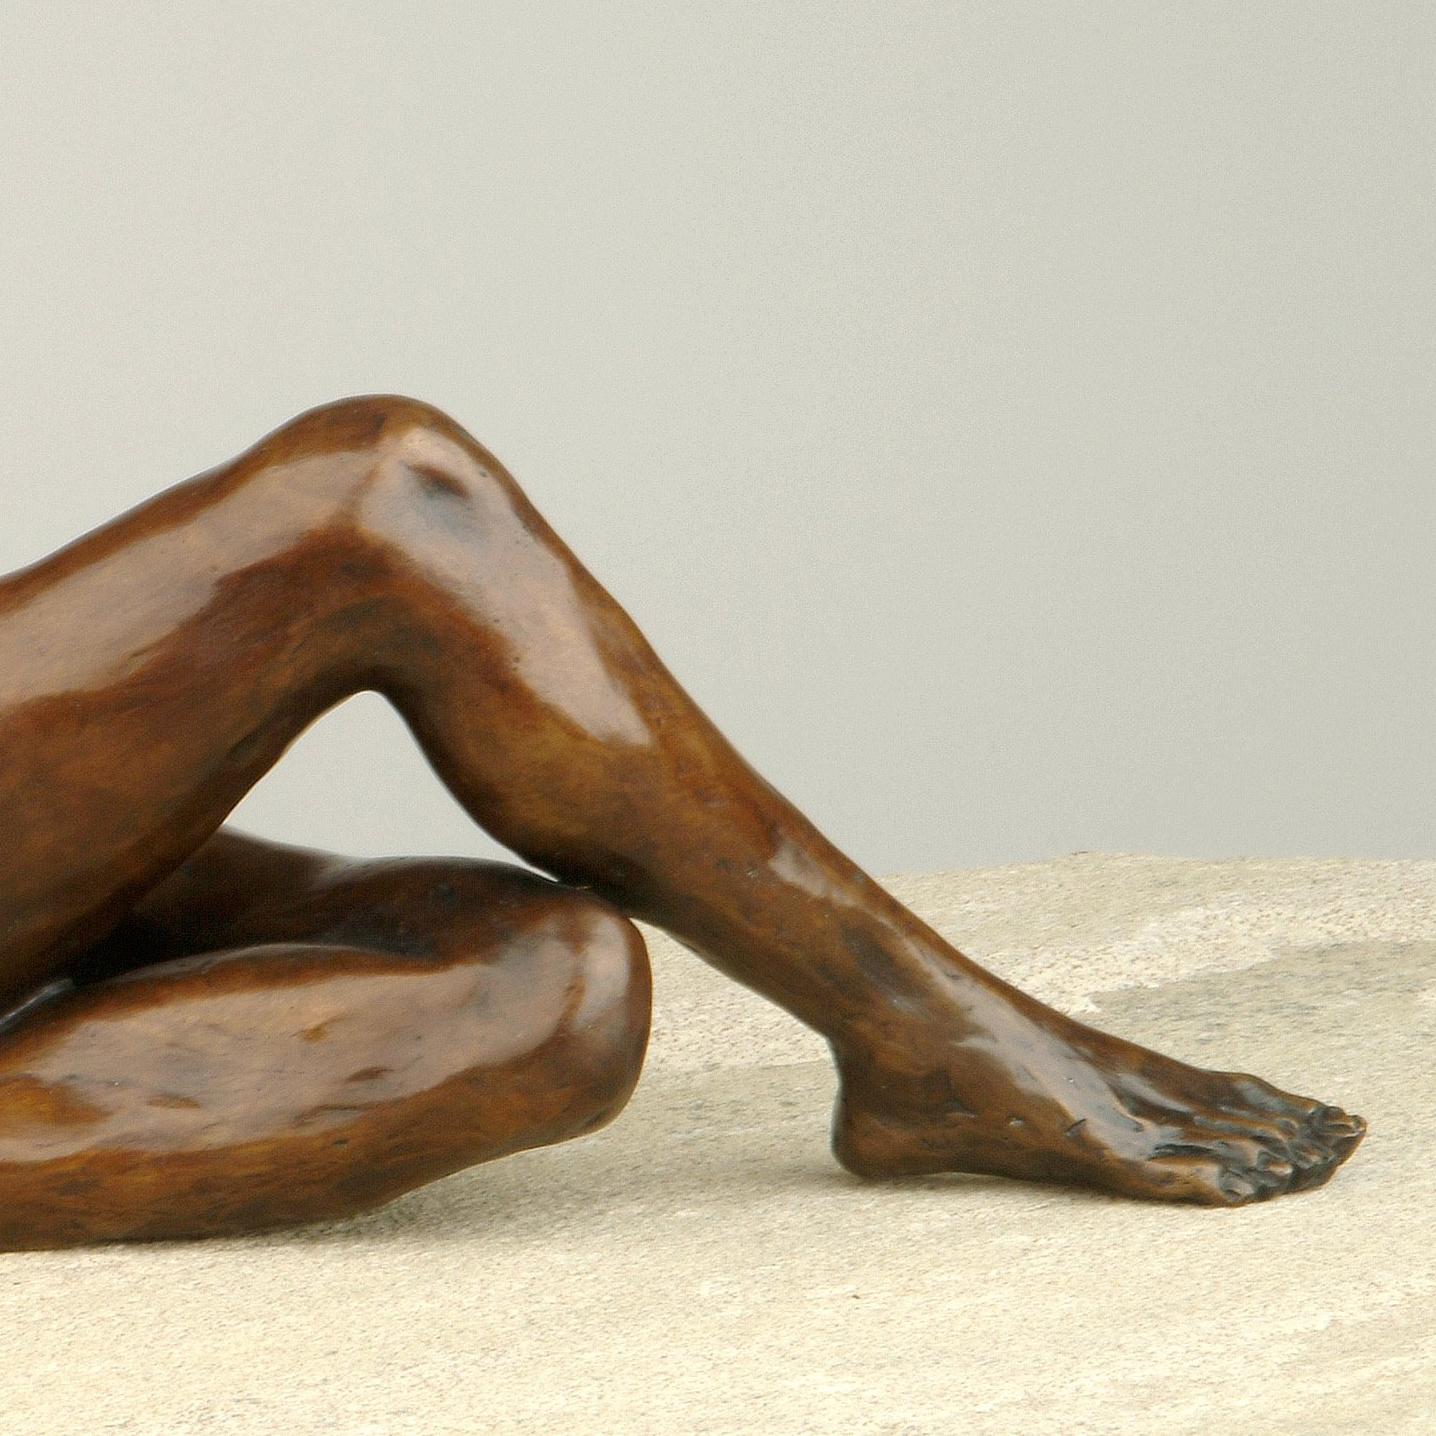 'Quiet Elegance' is a beautiful nude bronze sculpture of ballet dancer by the renowned sculptor Benson Landes.

For Benson Landes, sculpture was most definitely a passion. His oeuvre of cast bronzes is populated with ‘off duty’ ballet dancers,